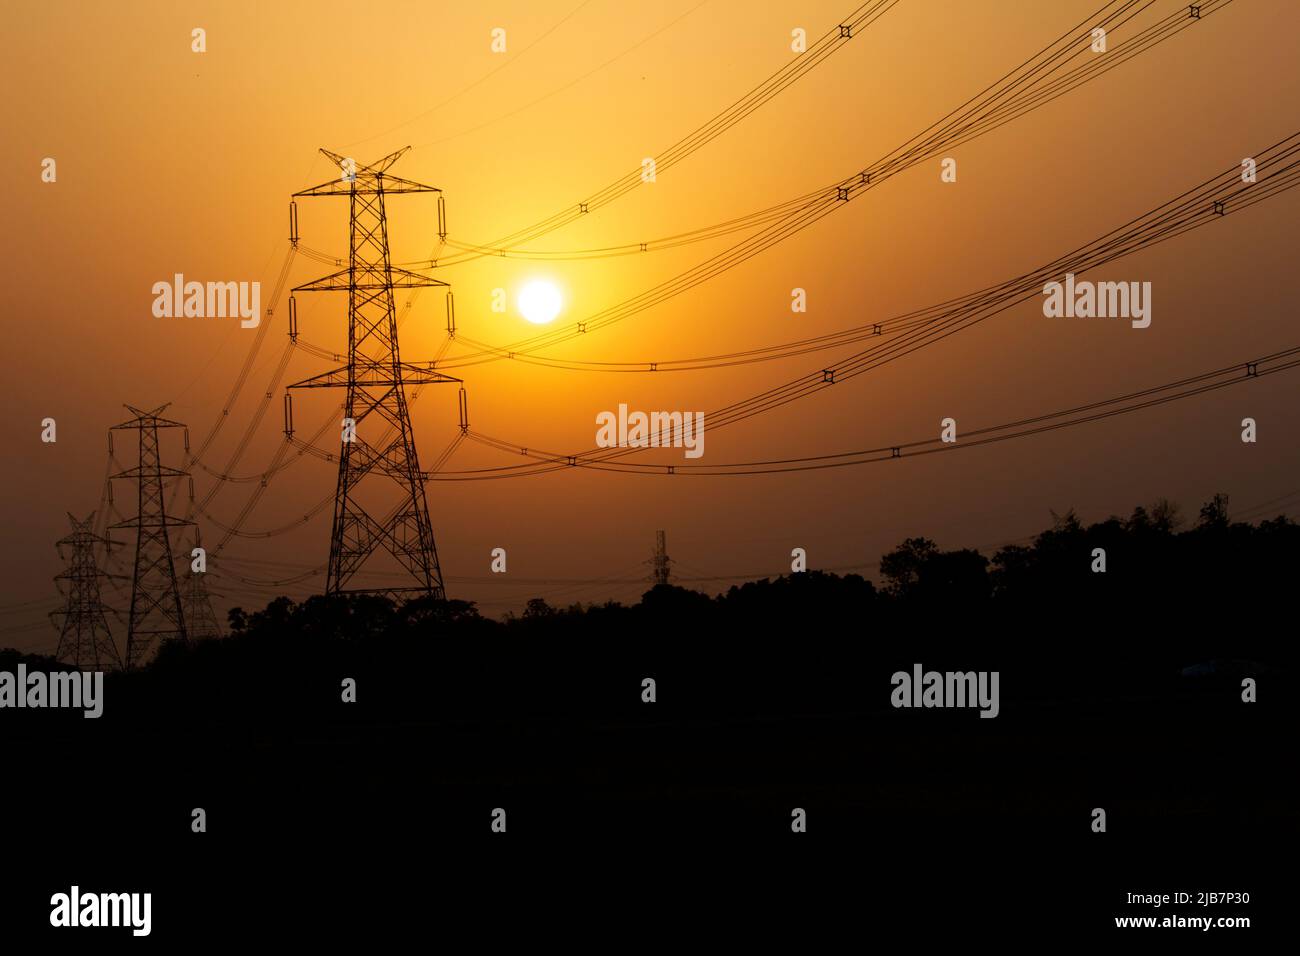 An electricity transmission pylon silhouetted Stock Photo